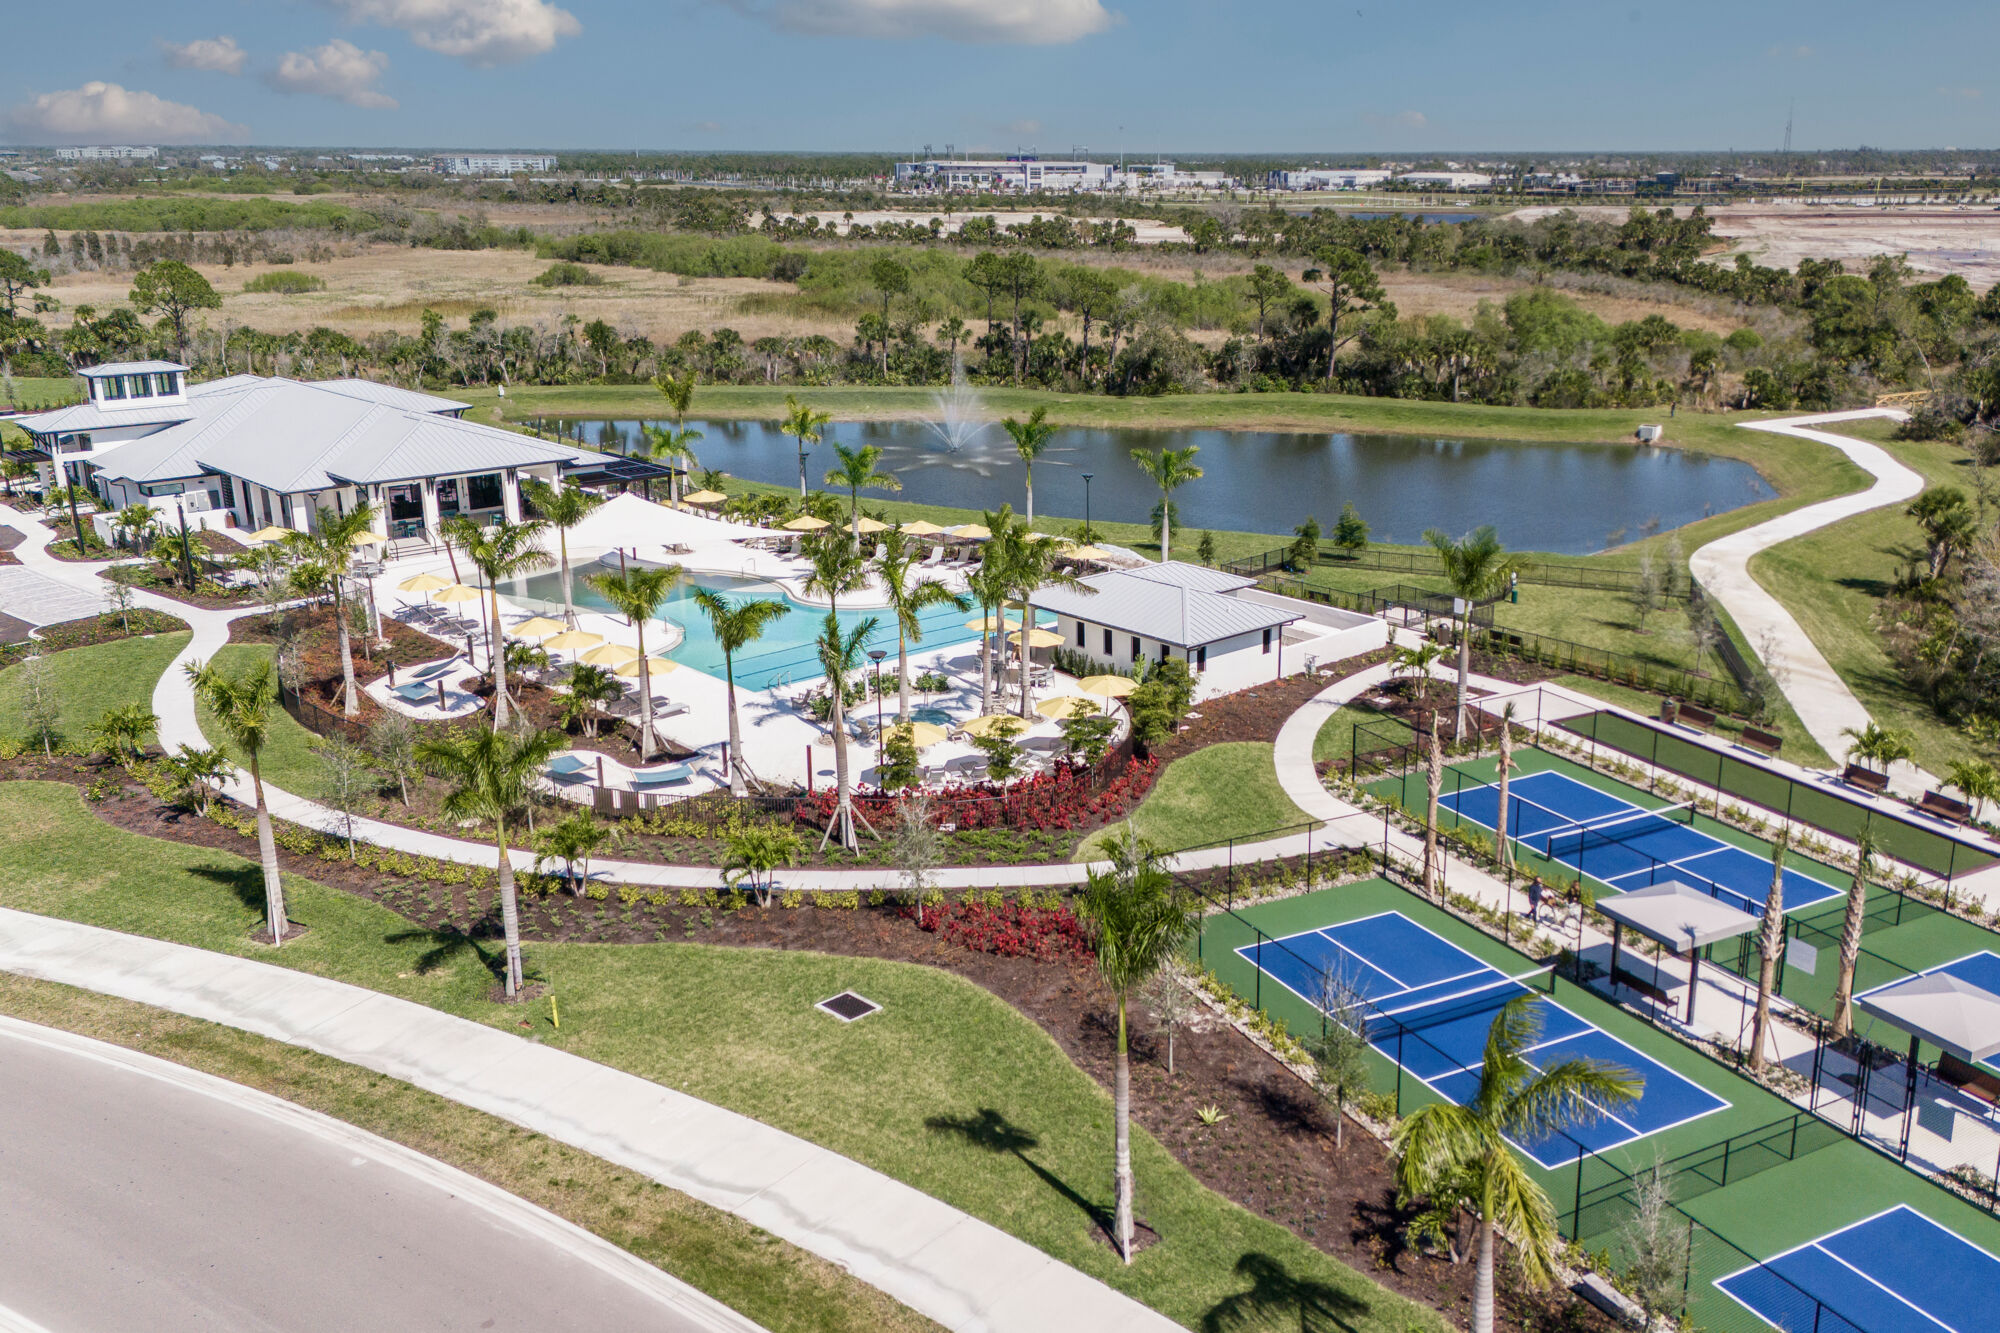 Wellen Park Florida - Homes For Sale, Communities & FAQs (Formerly